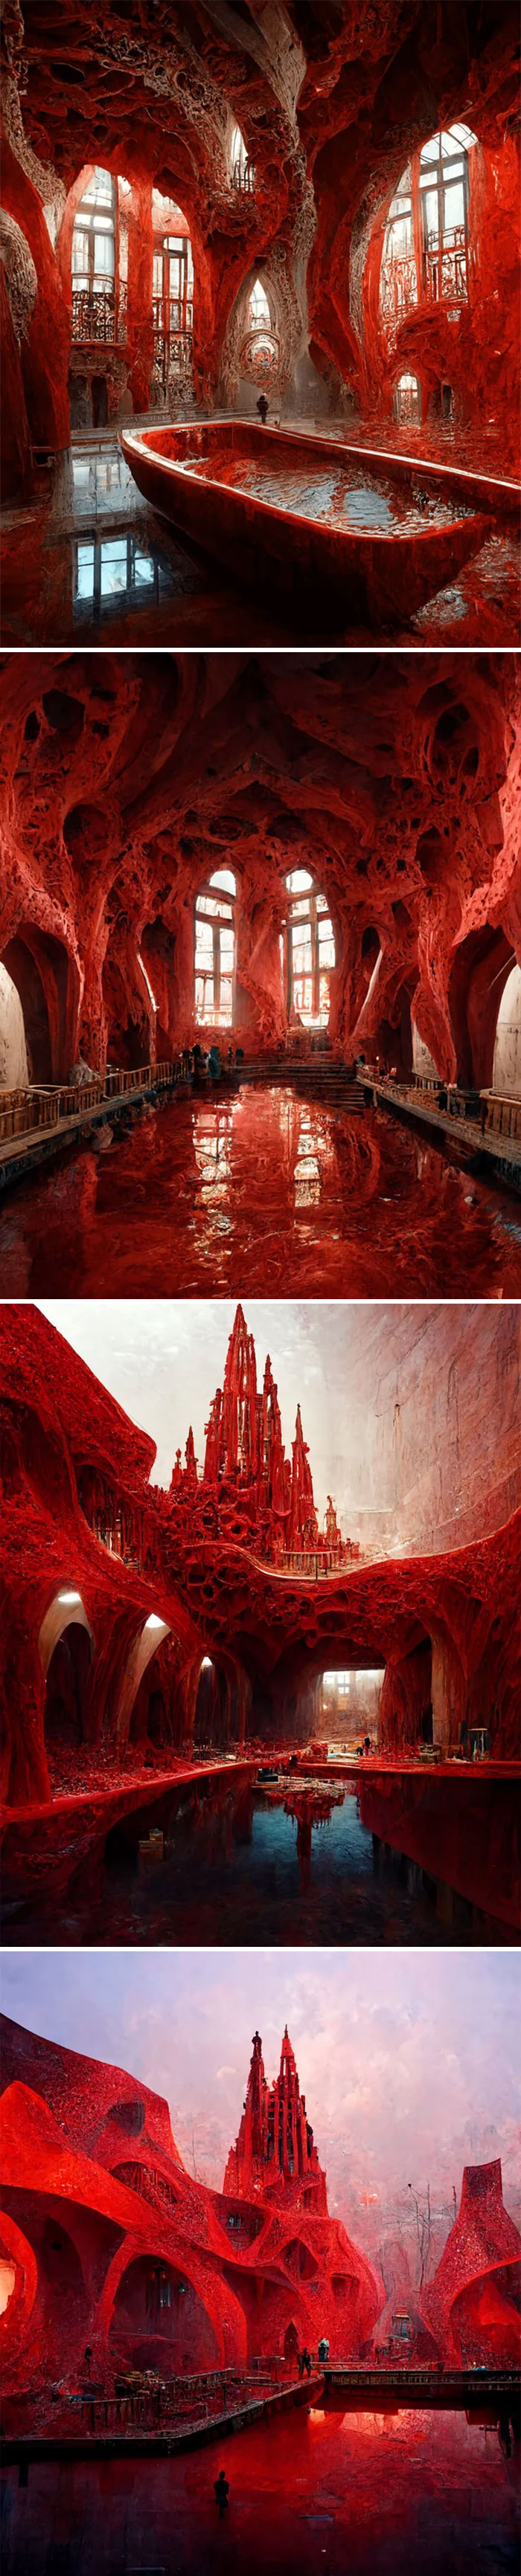 Architecture Of Blood By Kevin Abanto